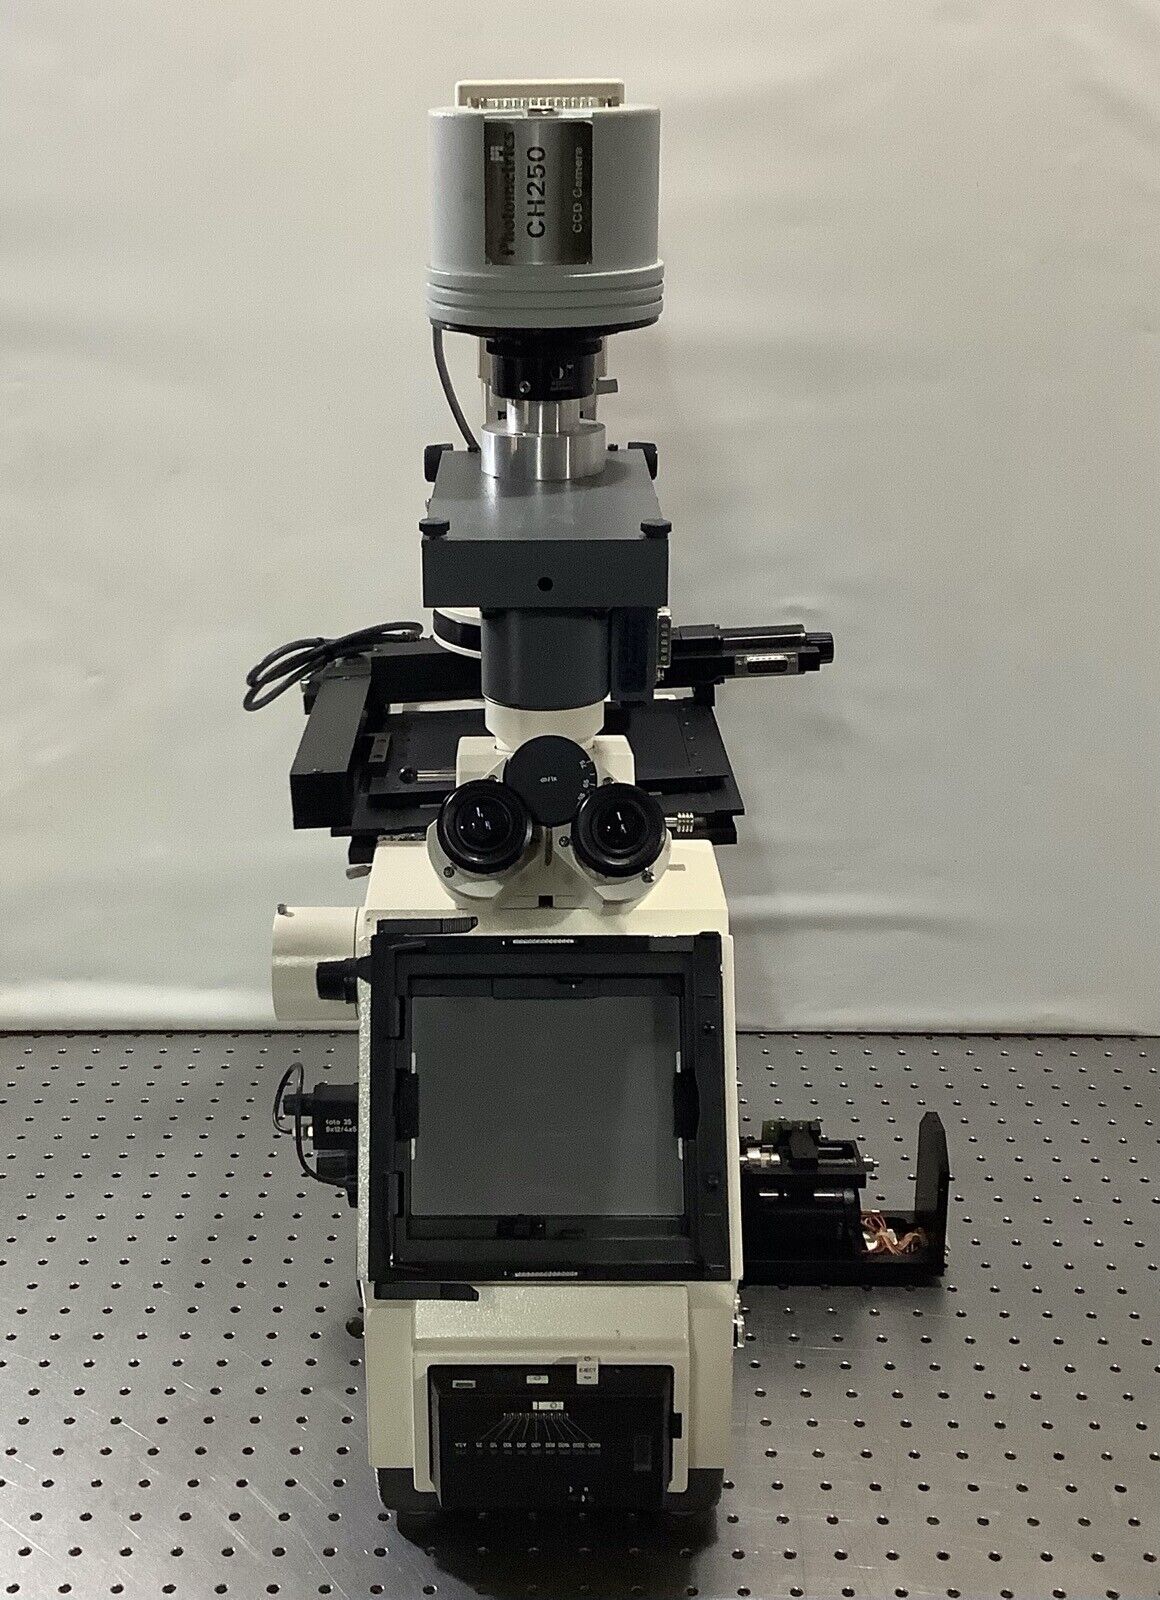 Carl Zeiss Axiovert 405 M Inverted Metallurgical Microscope